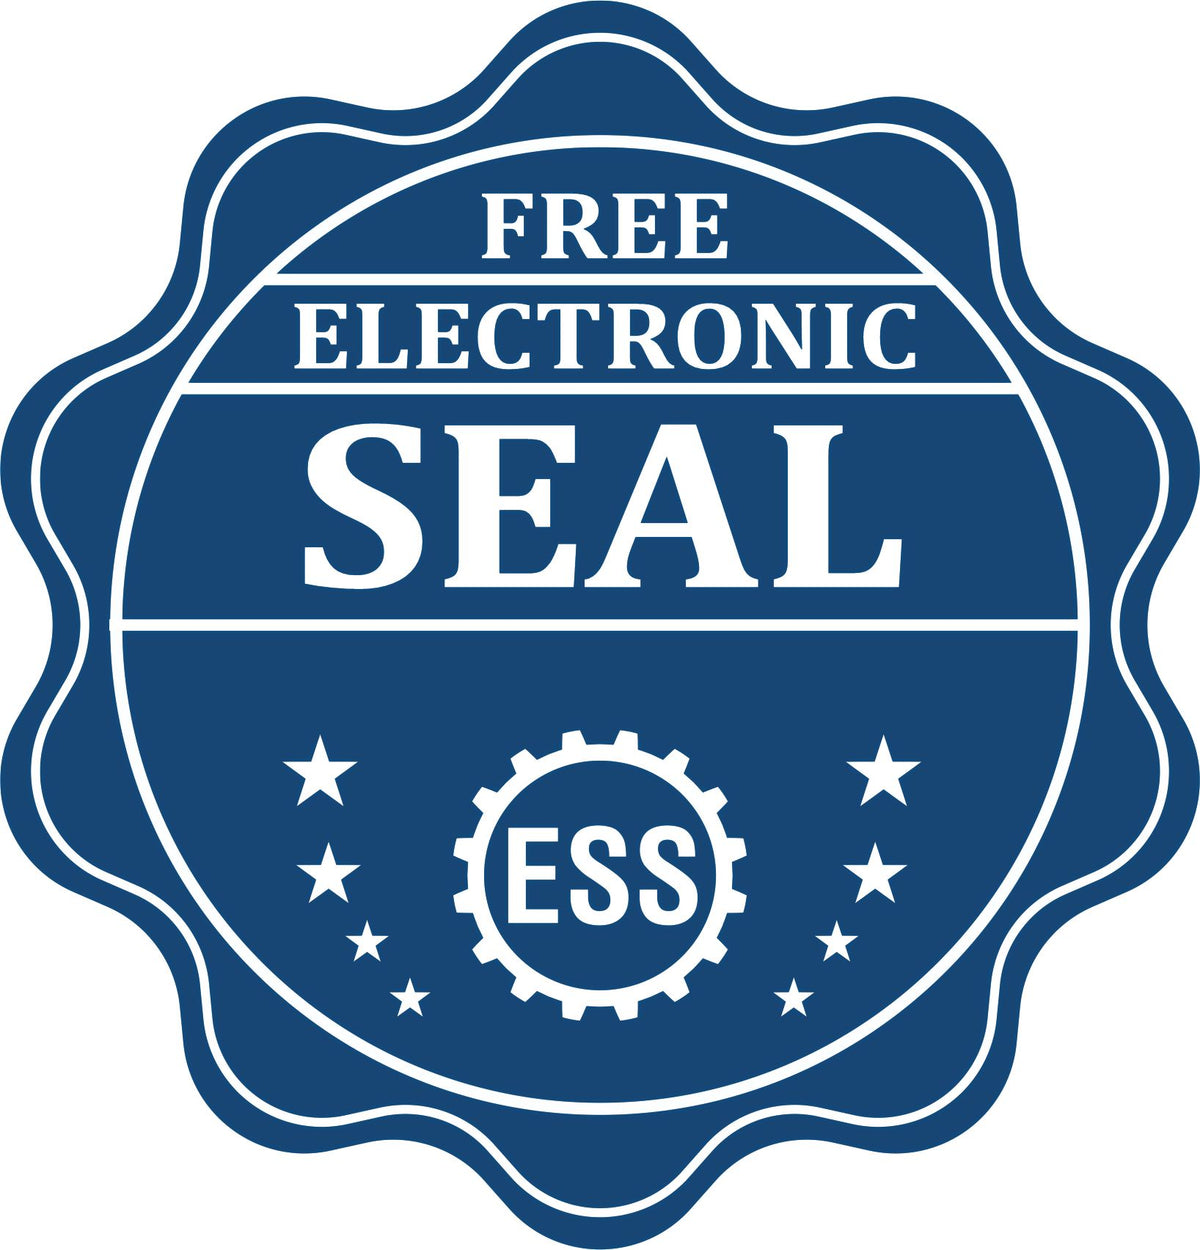 A badge showing a free electronic seal for the Premium MaxLight Pre-Inked Nebraska Geology Stamp with stars and the ESS gear on the emblem.